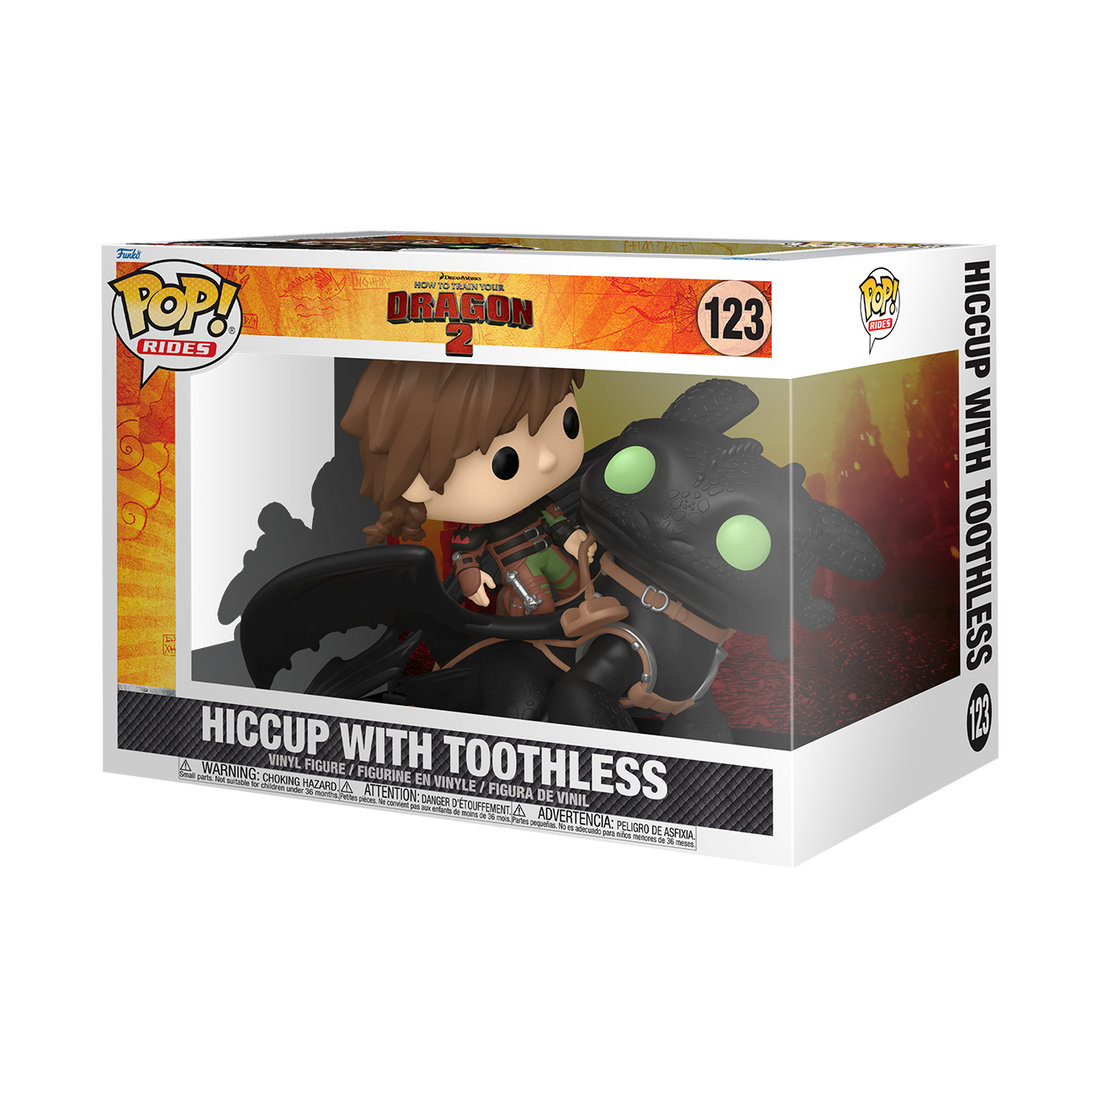 Funko Pop! Rides How To Train Your Dragon 2 123 Hiccup with Toothless Funko